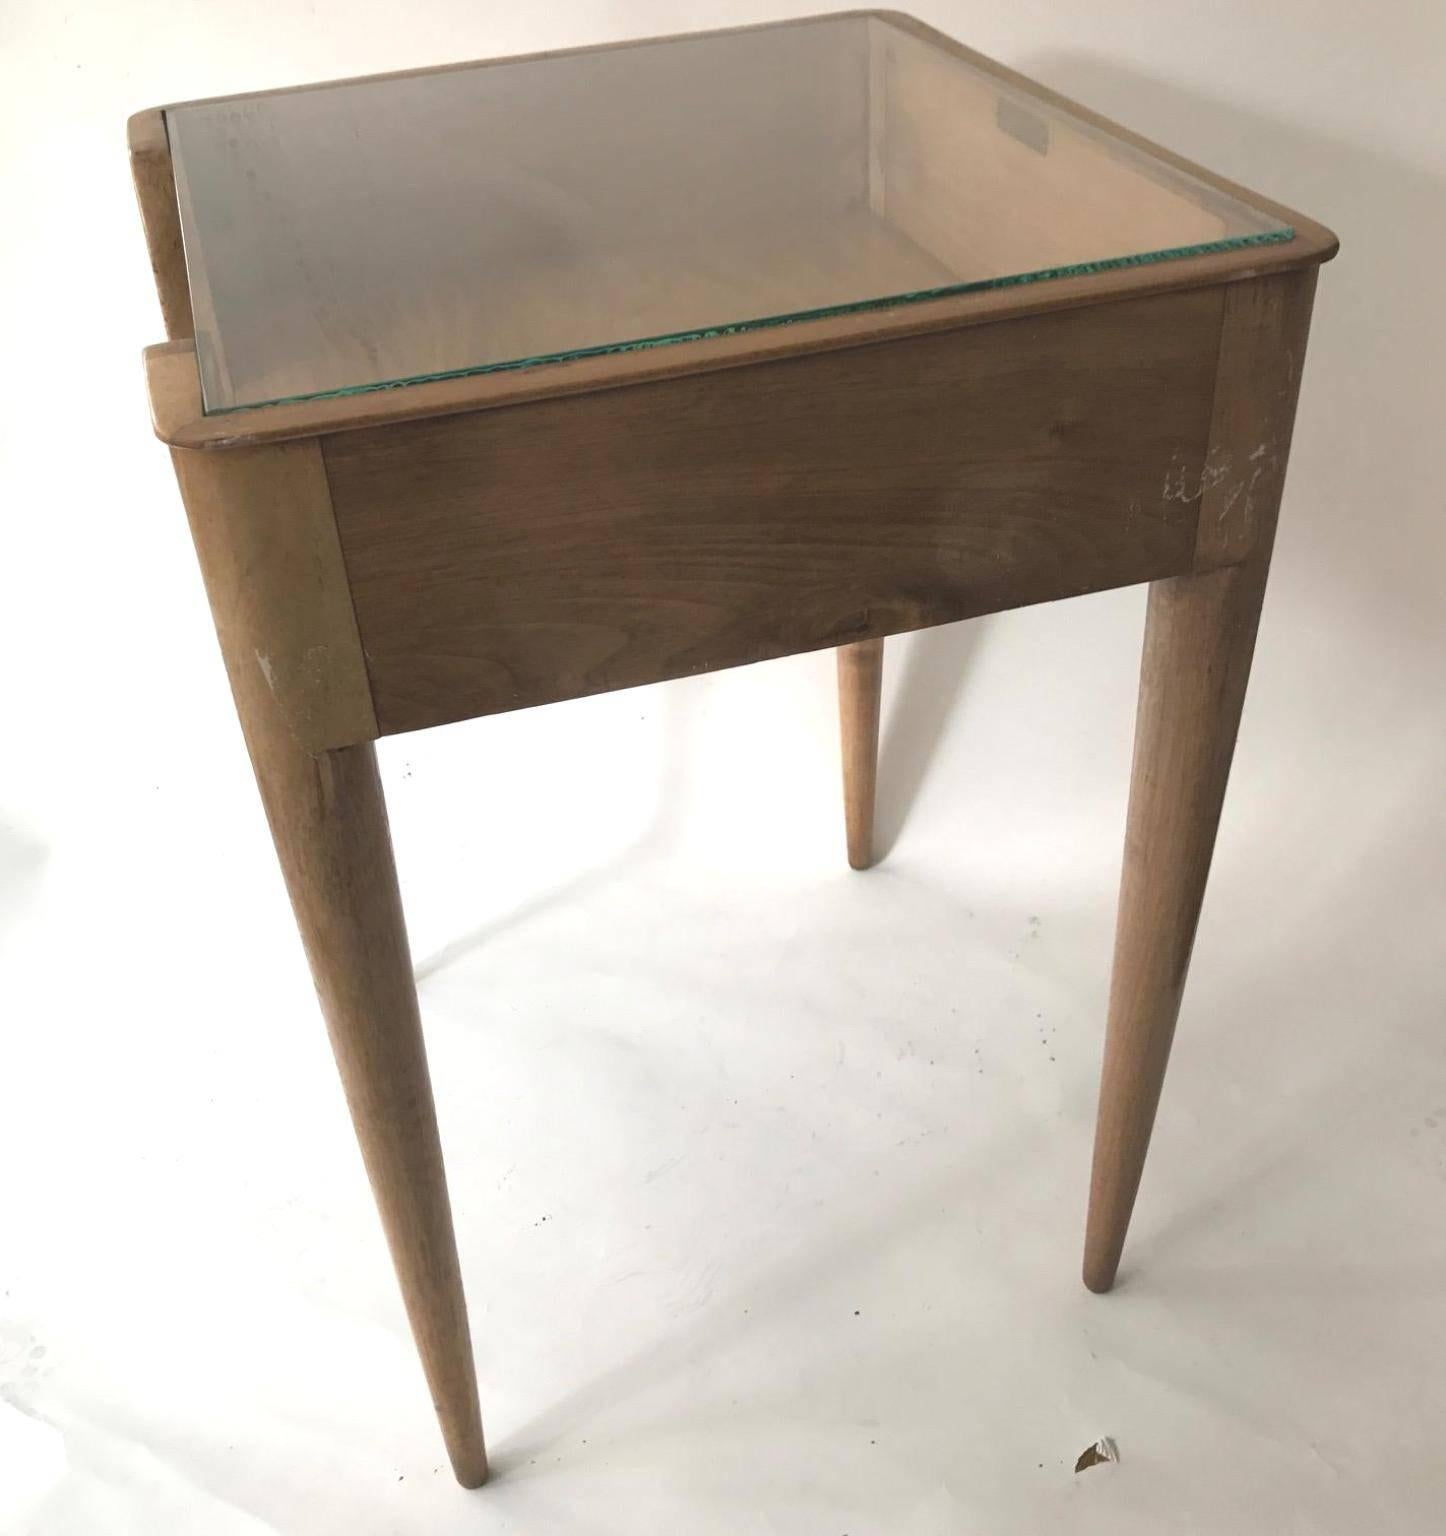 A pair of Italian circa 1937 side tables in bleached walnut and the glass top, from hotel Mediterranio. Label from Fratteli Strada, attributed to Gio Ponti.